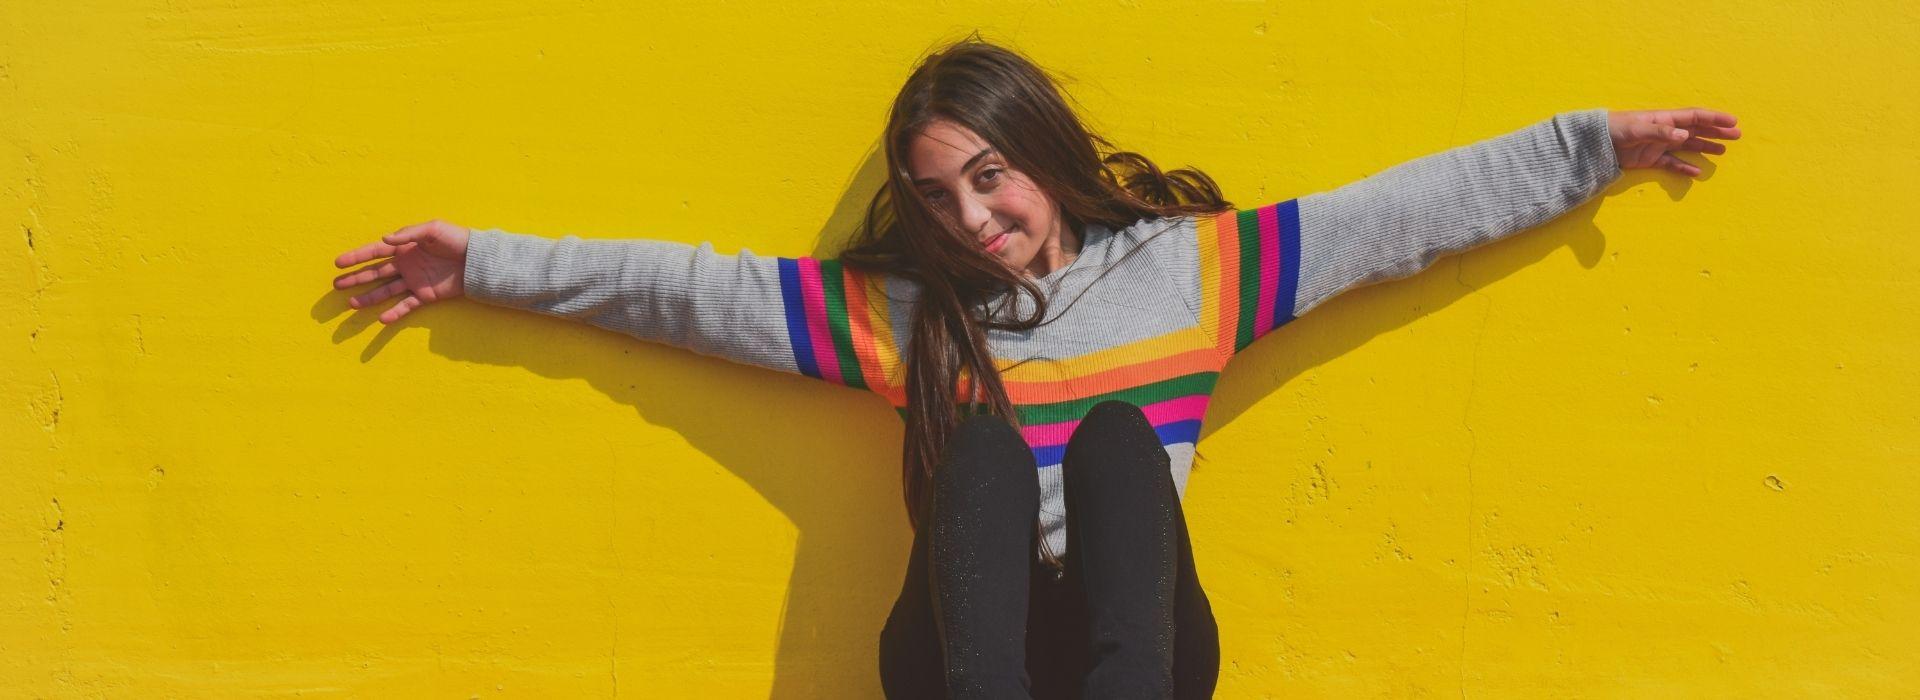 Teen sits with her arms out in front of a yellow wall